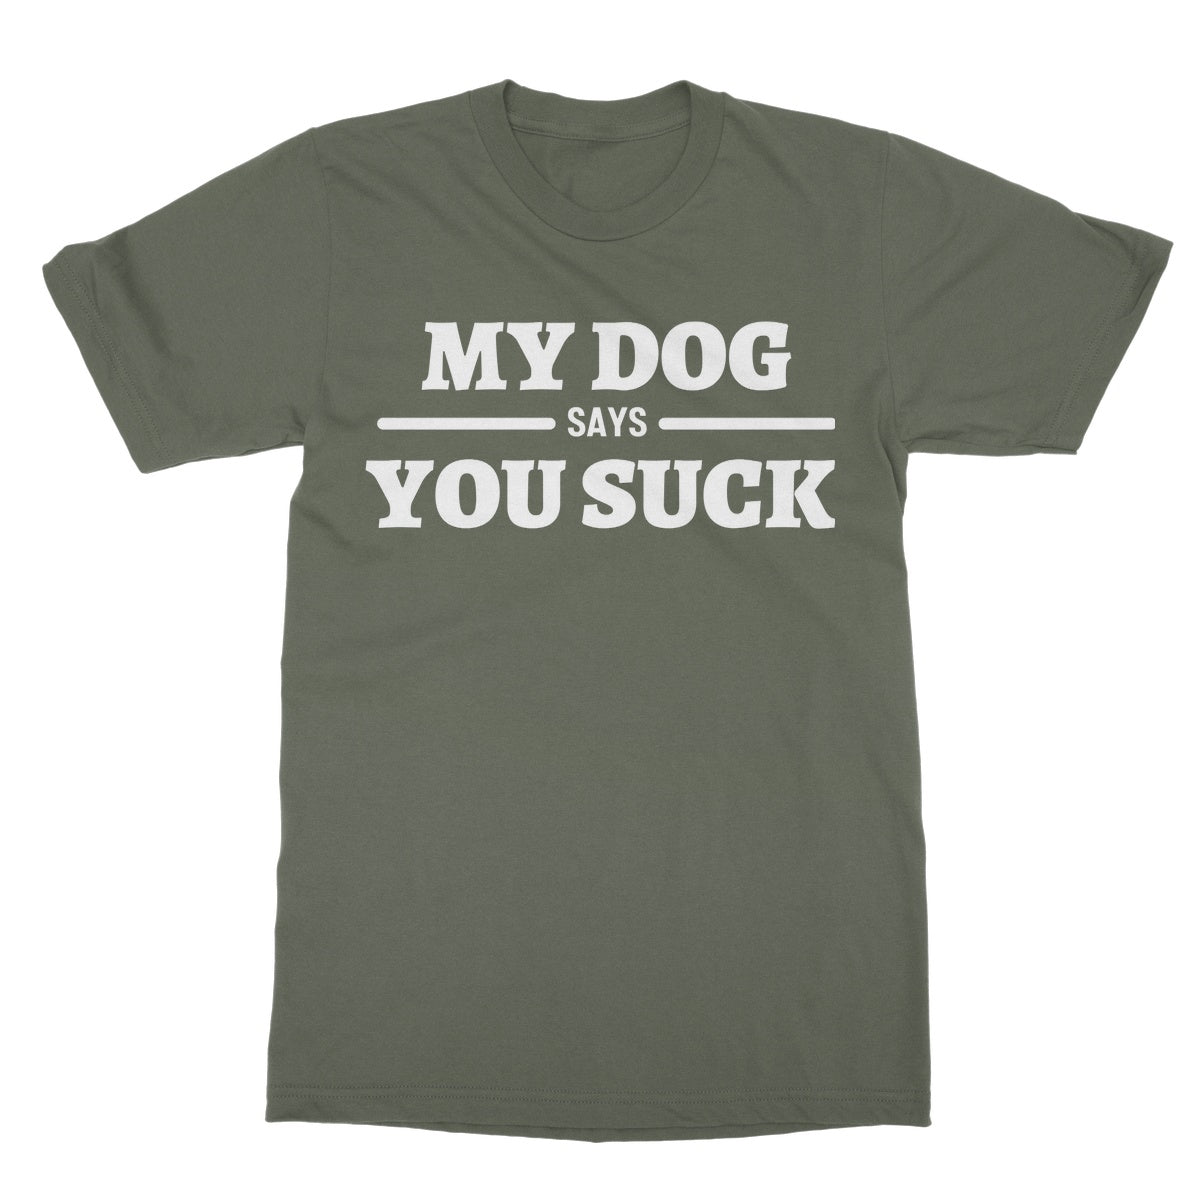 my dog says you suck t shirt green